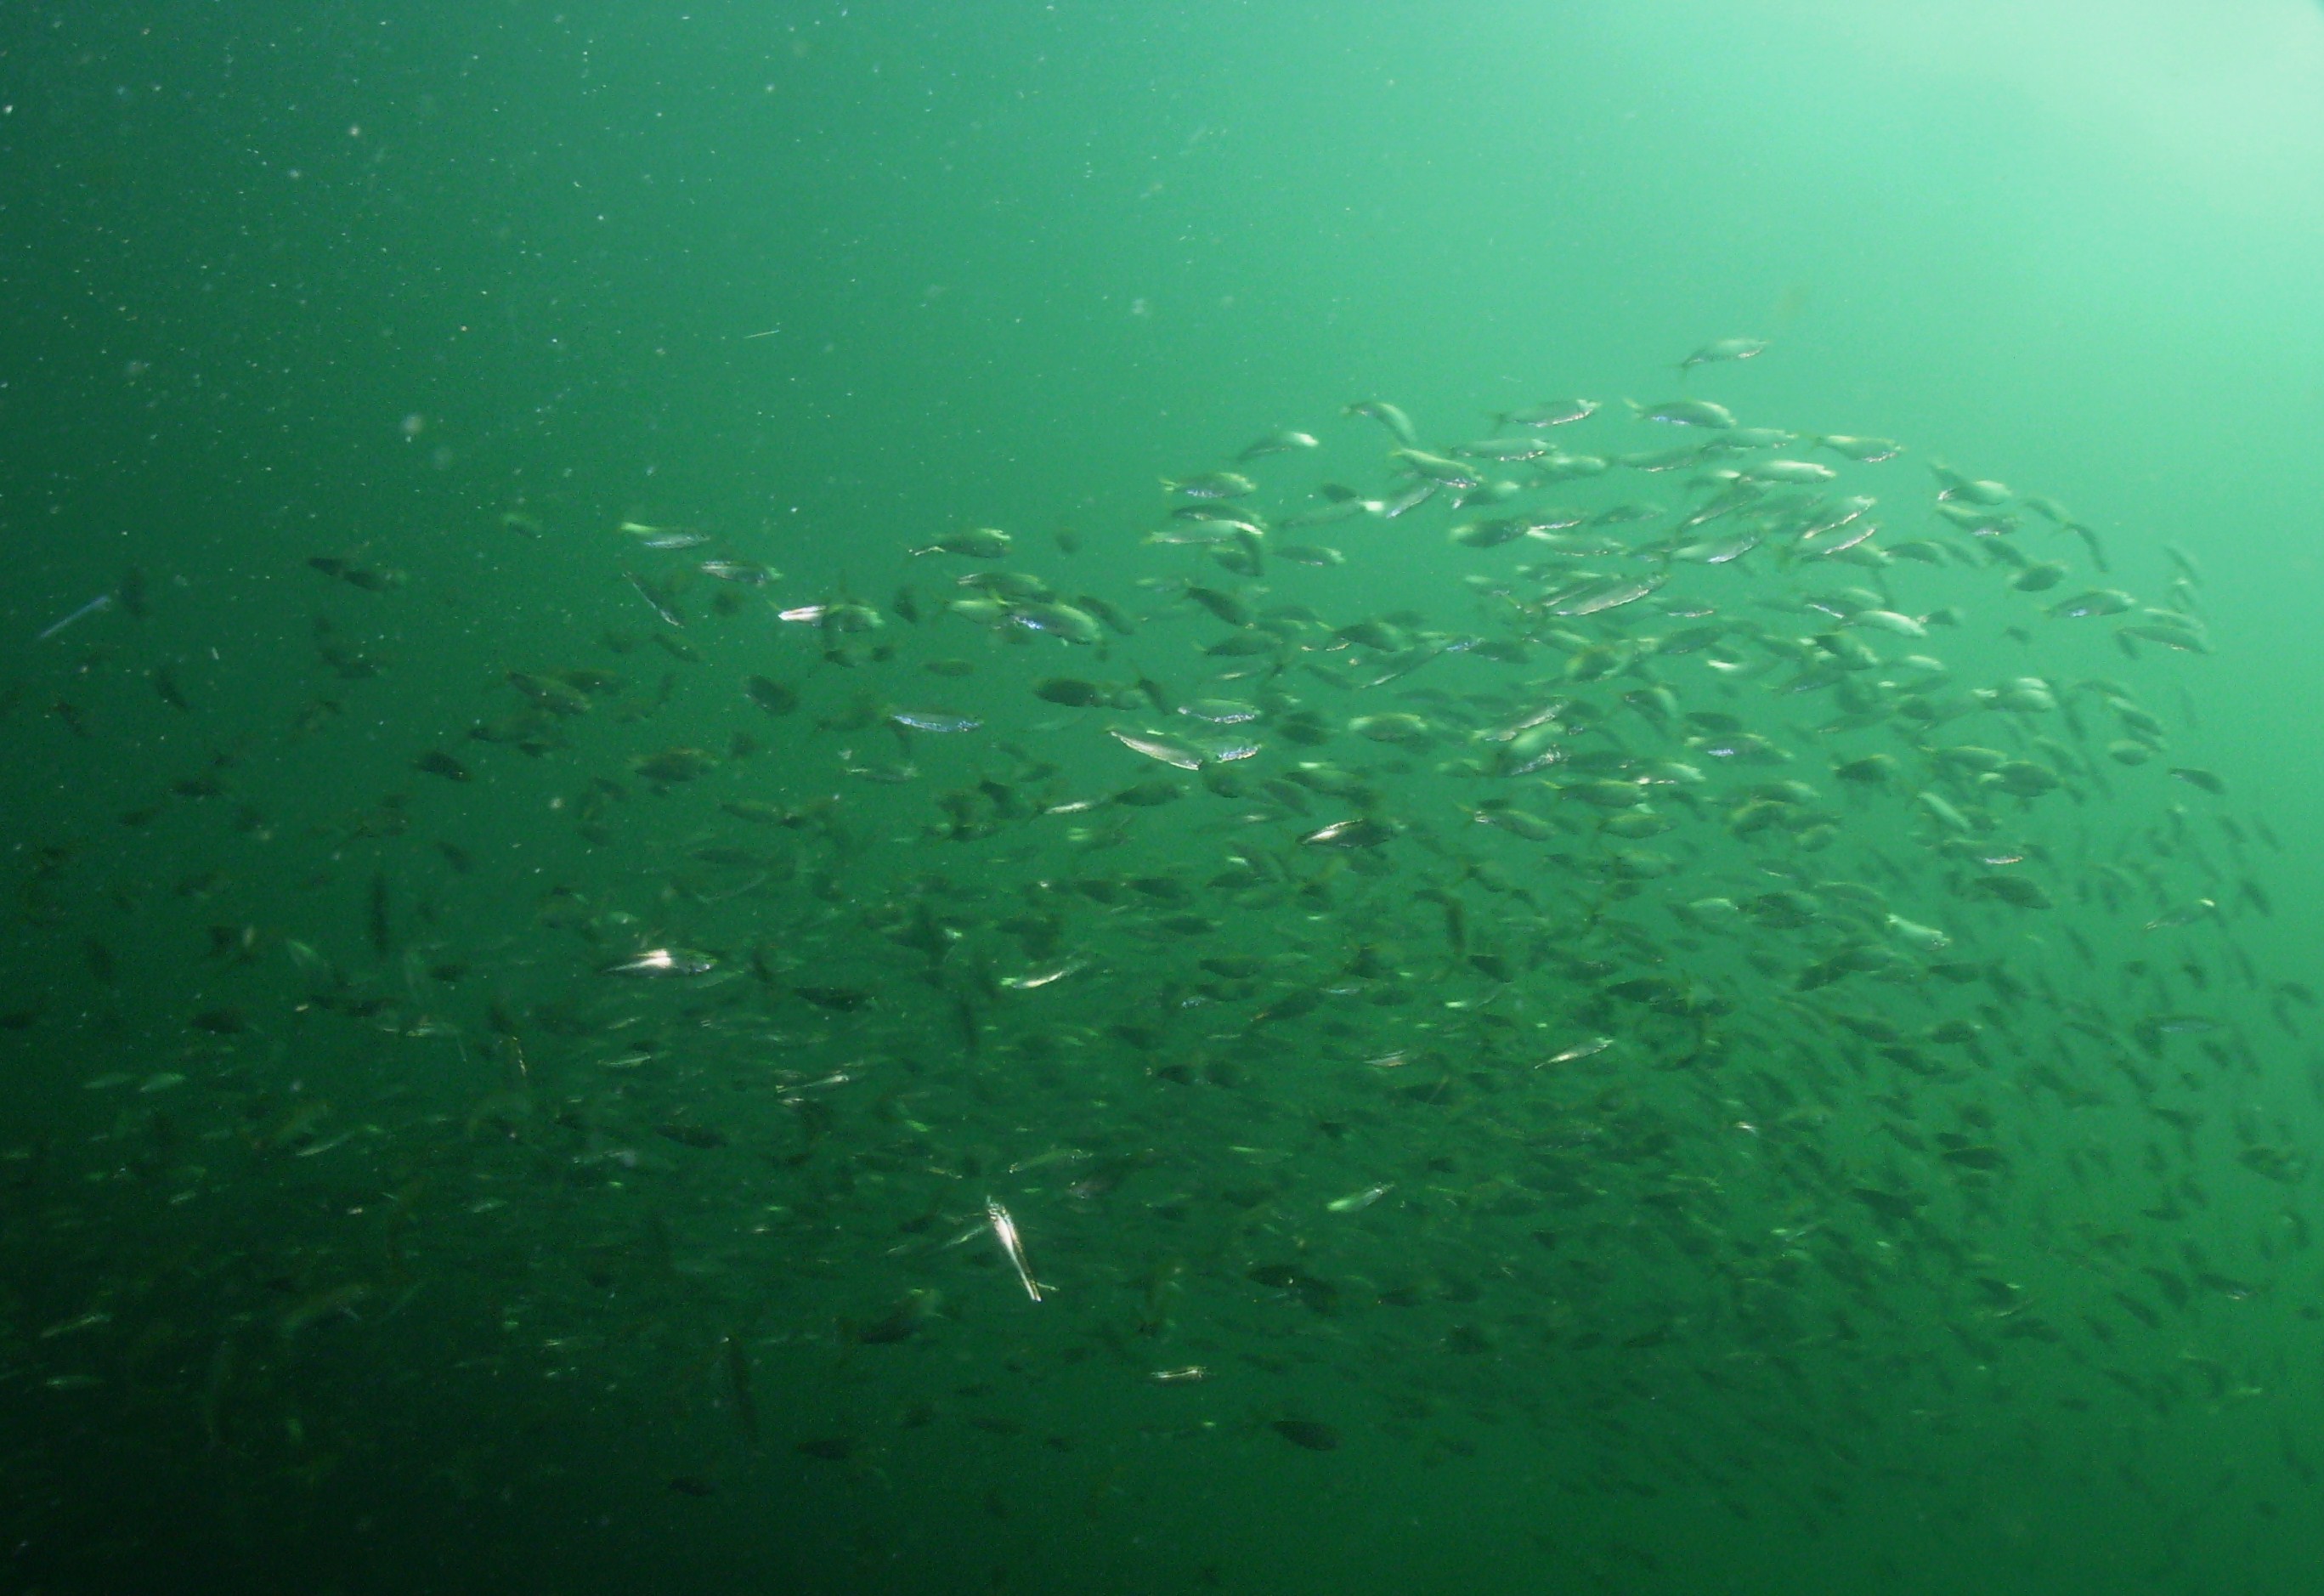 Bait fish at the coal barges off of Gulf Breeze